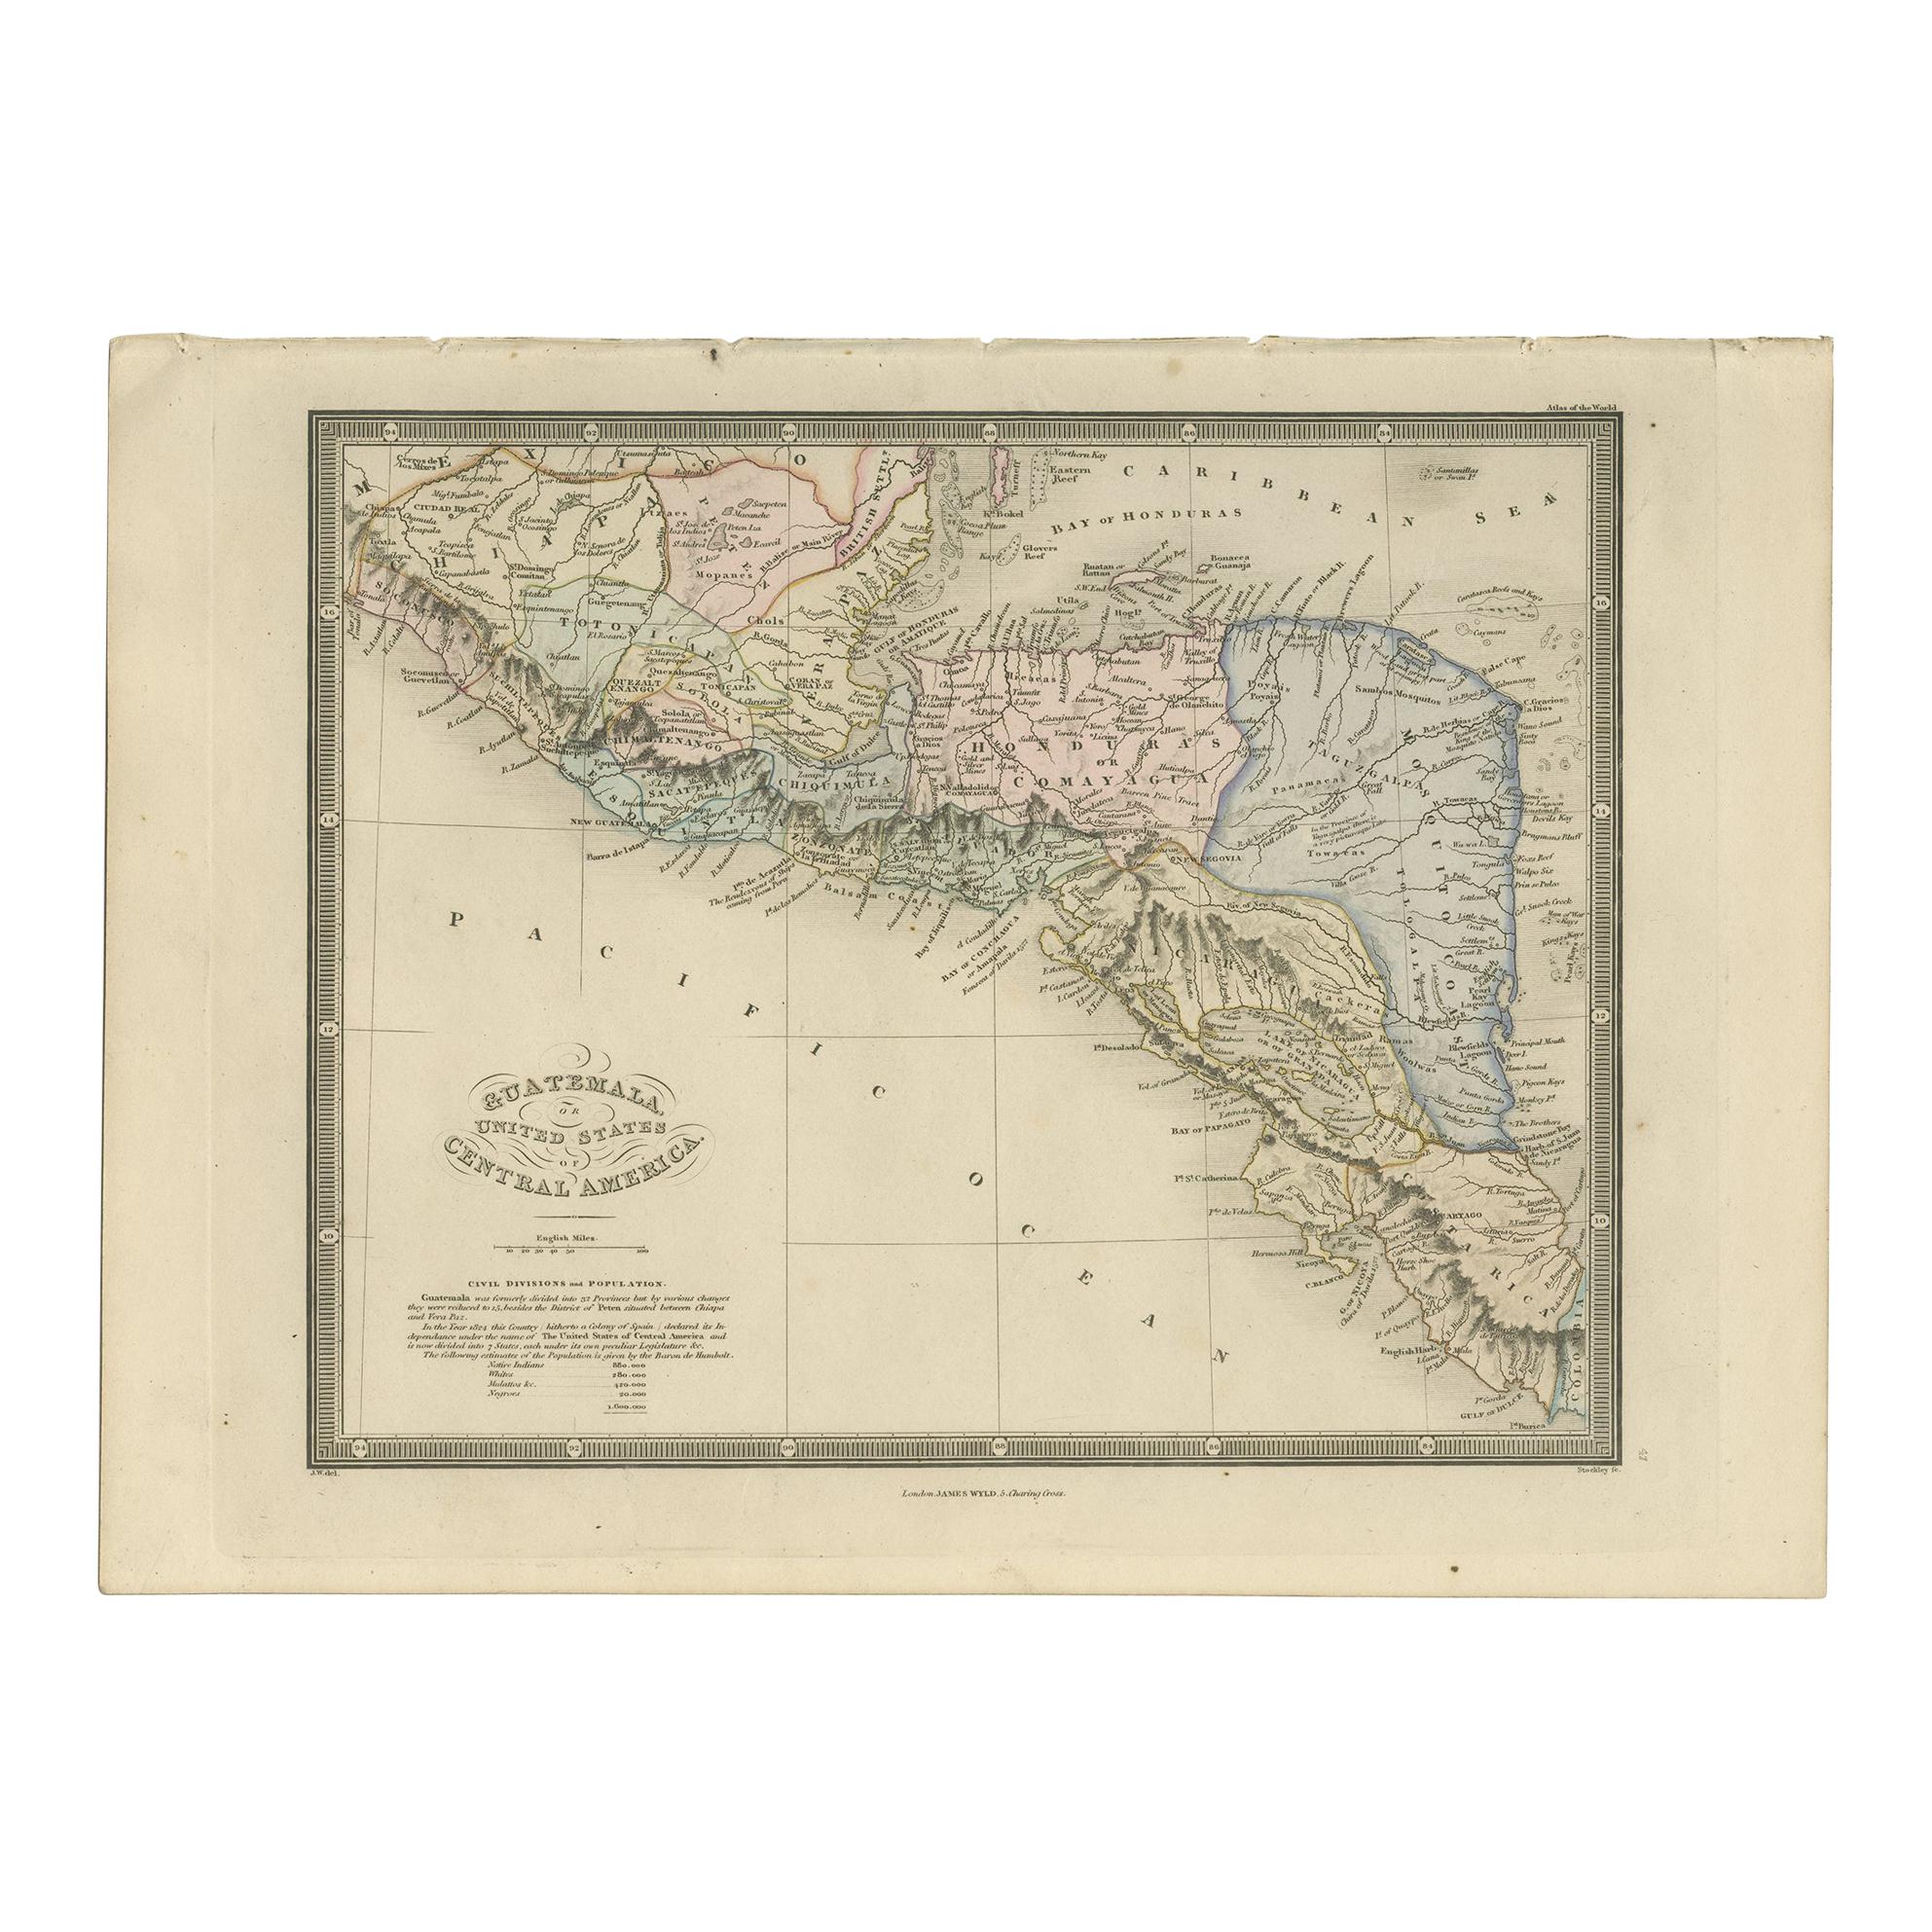 Map of Guatemala or the Former United Provinces of Central America, 1845